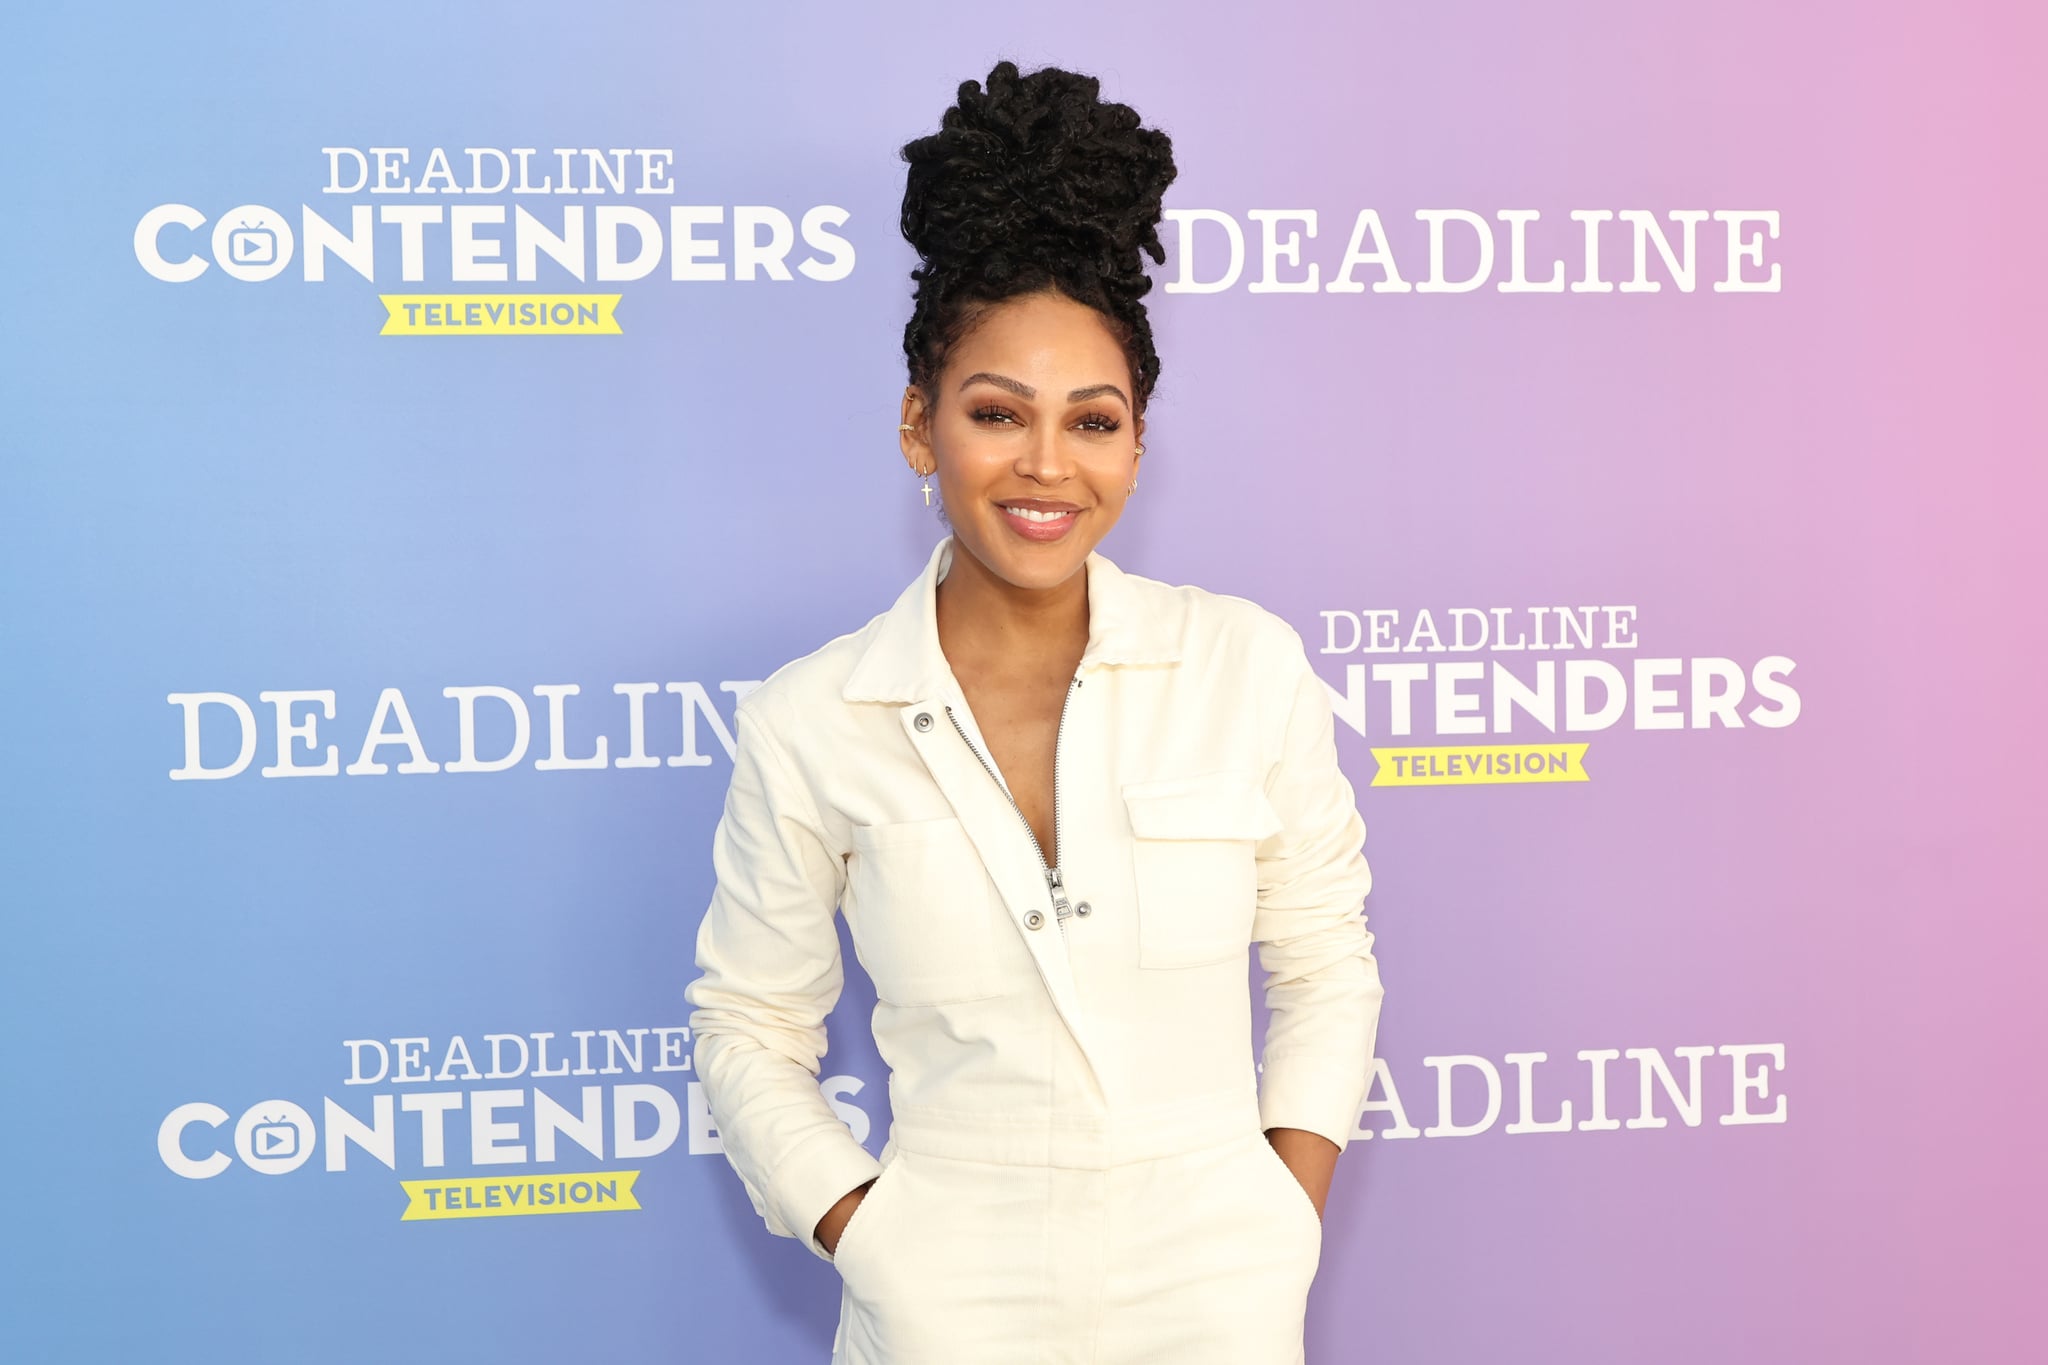 LOS ANGELES, CALIFORNIA - APRIL 10: Actor Meagan Good from Amazon Prime Video's 'Harlem' attends Deadline Contenders Television at Paramount Studios on April 10, 2022 in Los Angeles, California. (Photo by Amy Sussman/Getty Images for Deadline Hollywood )